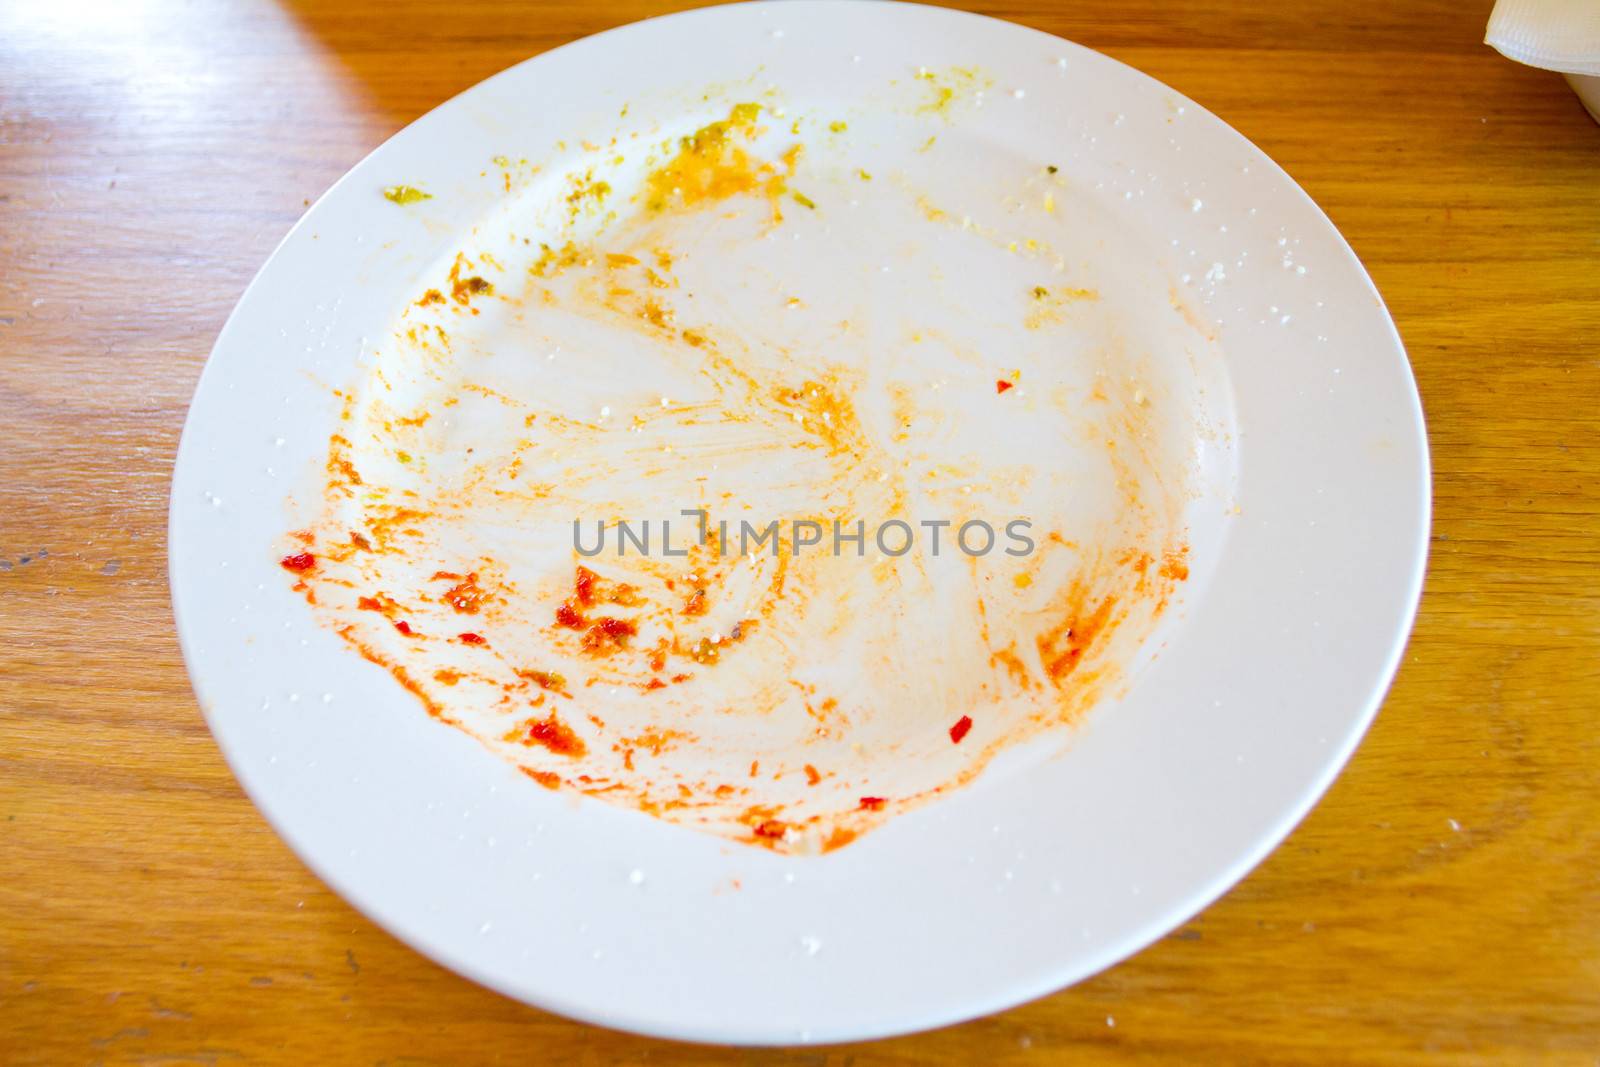 This plate used to have food on it but everything was been eaten at this restaurant leaving the plate where the meal was empty.